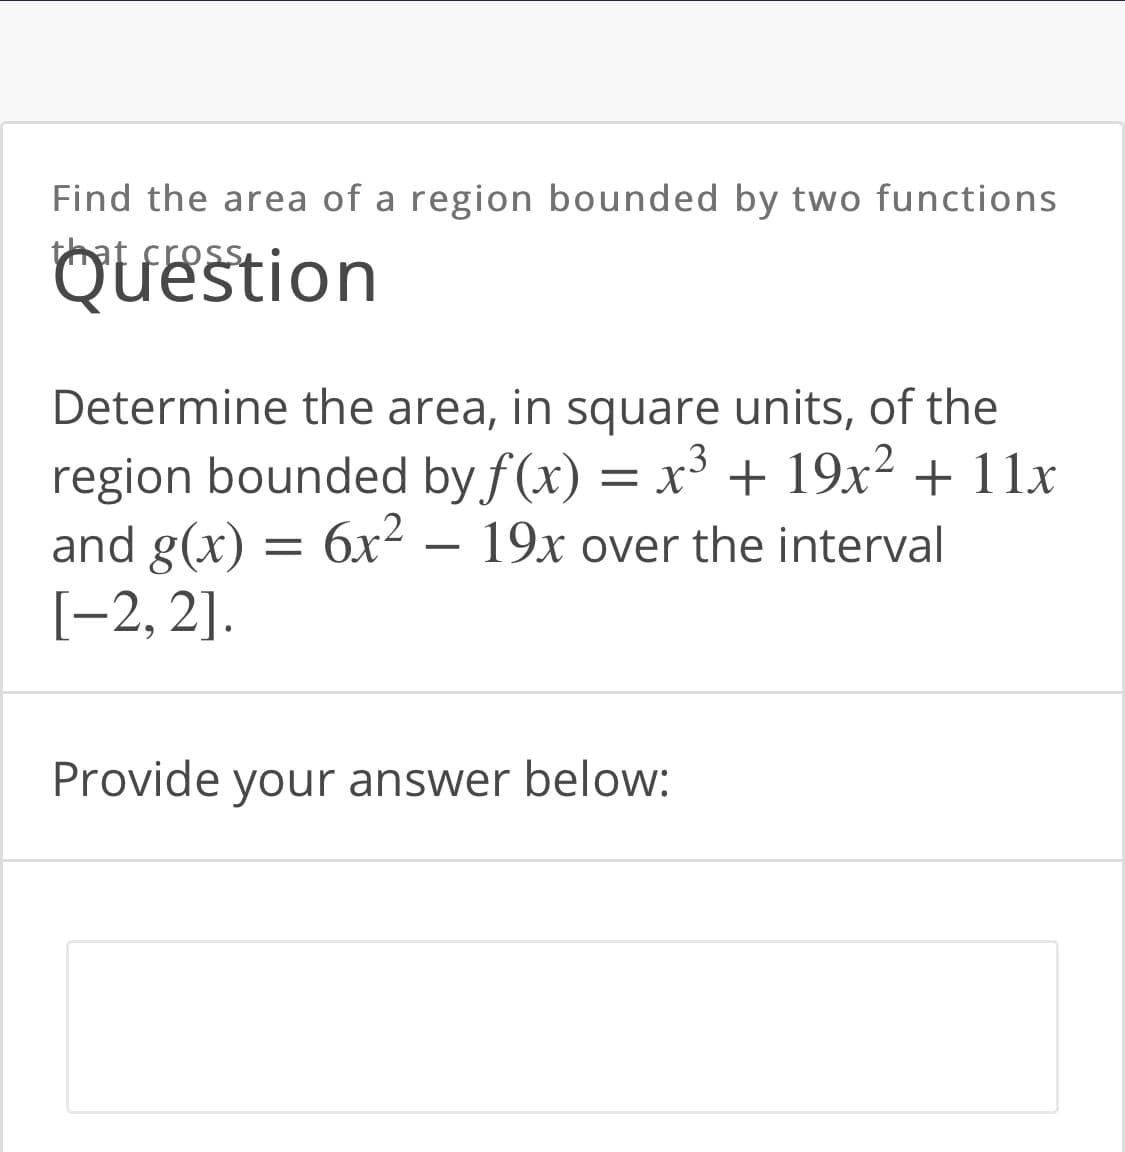 Find the area of a region bounded by two functions
that fres
Ouestion
Determine the area, in square units, of the
region bounded by f (x) = x³ + 19x² + 11x
and g(x) = 6x² – 19x over the interval
[-2, 2].
Provide your answer below:
